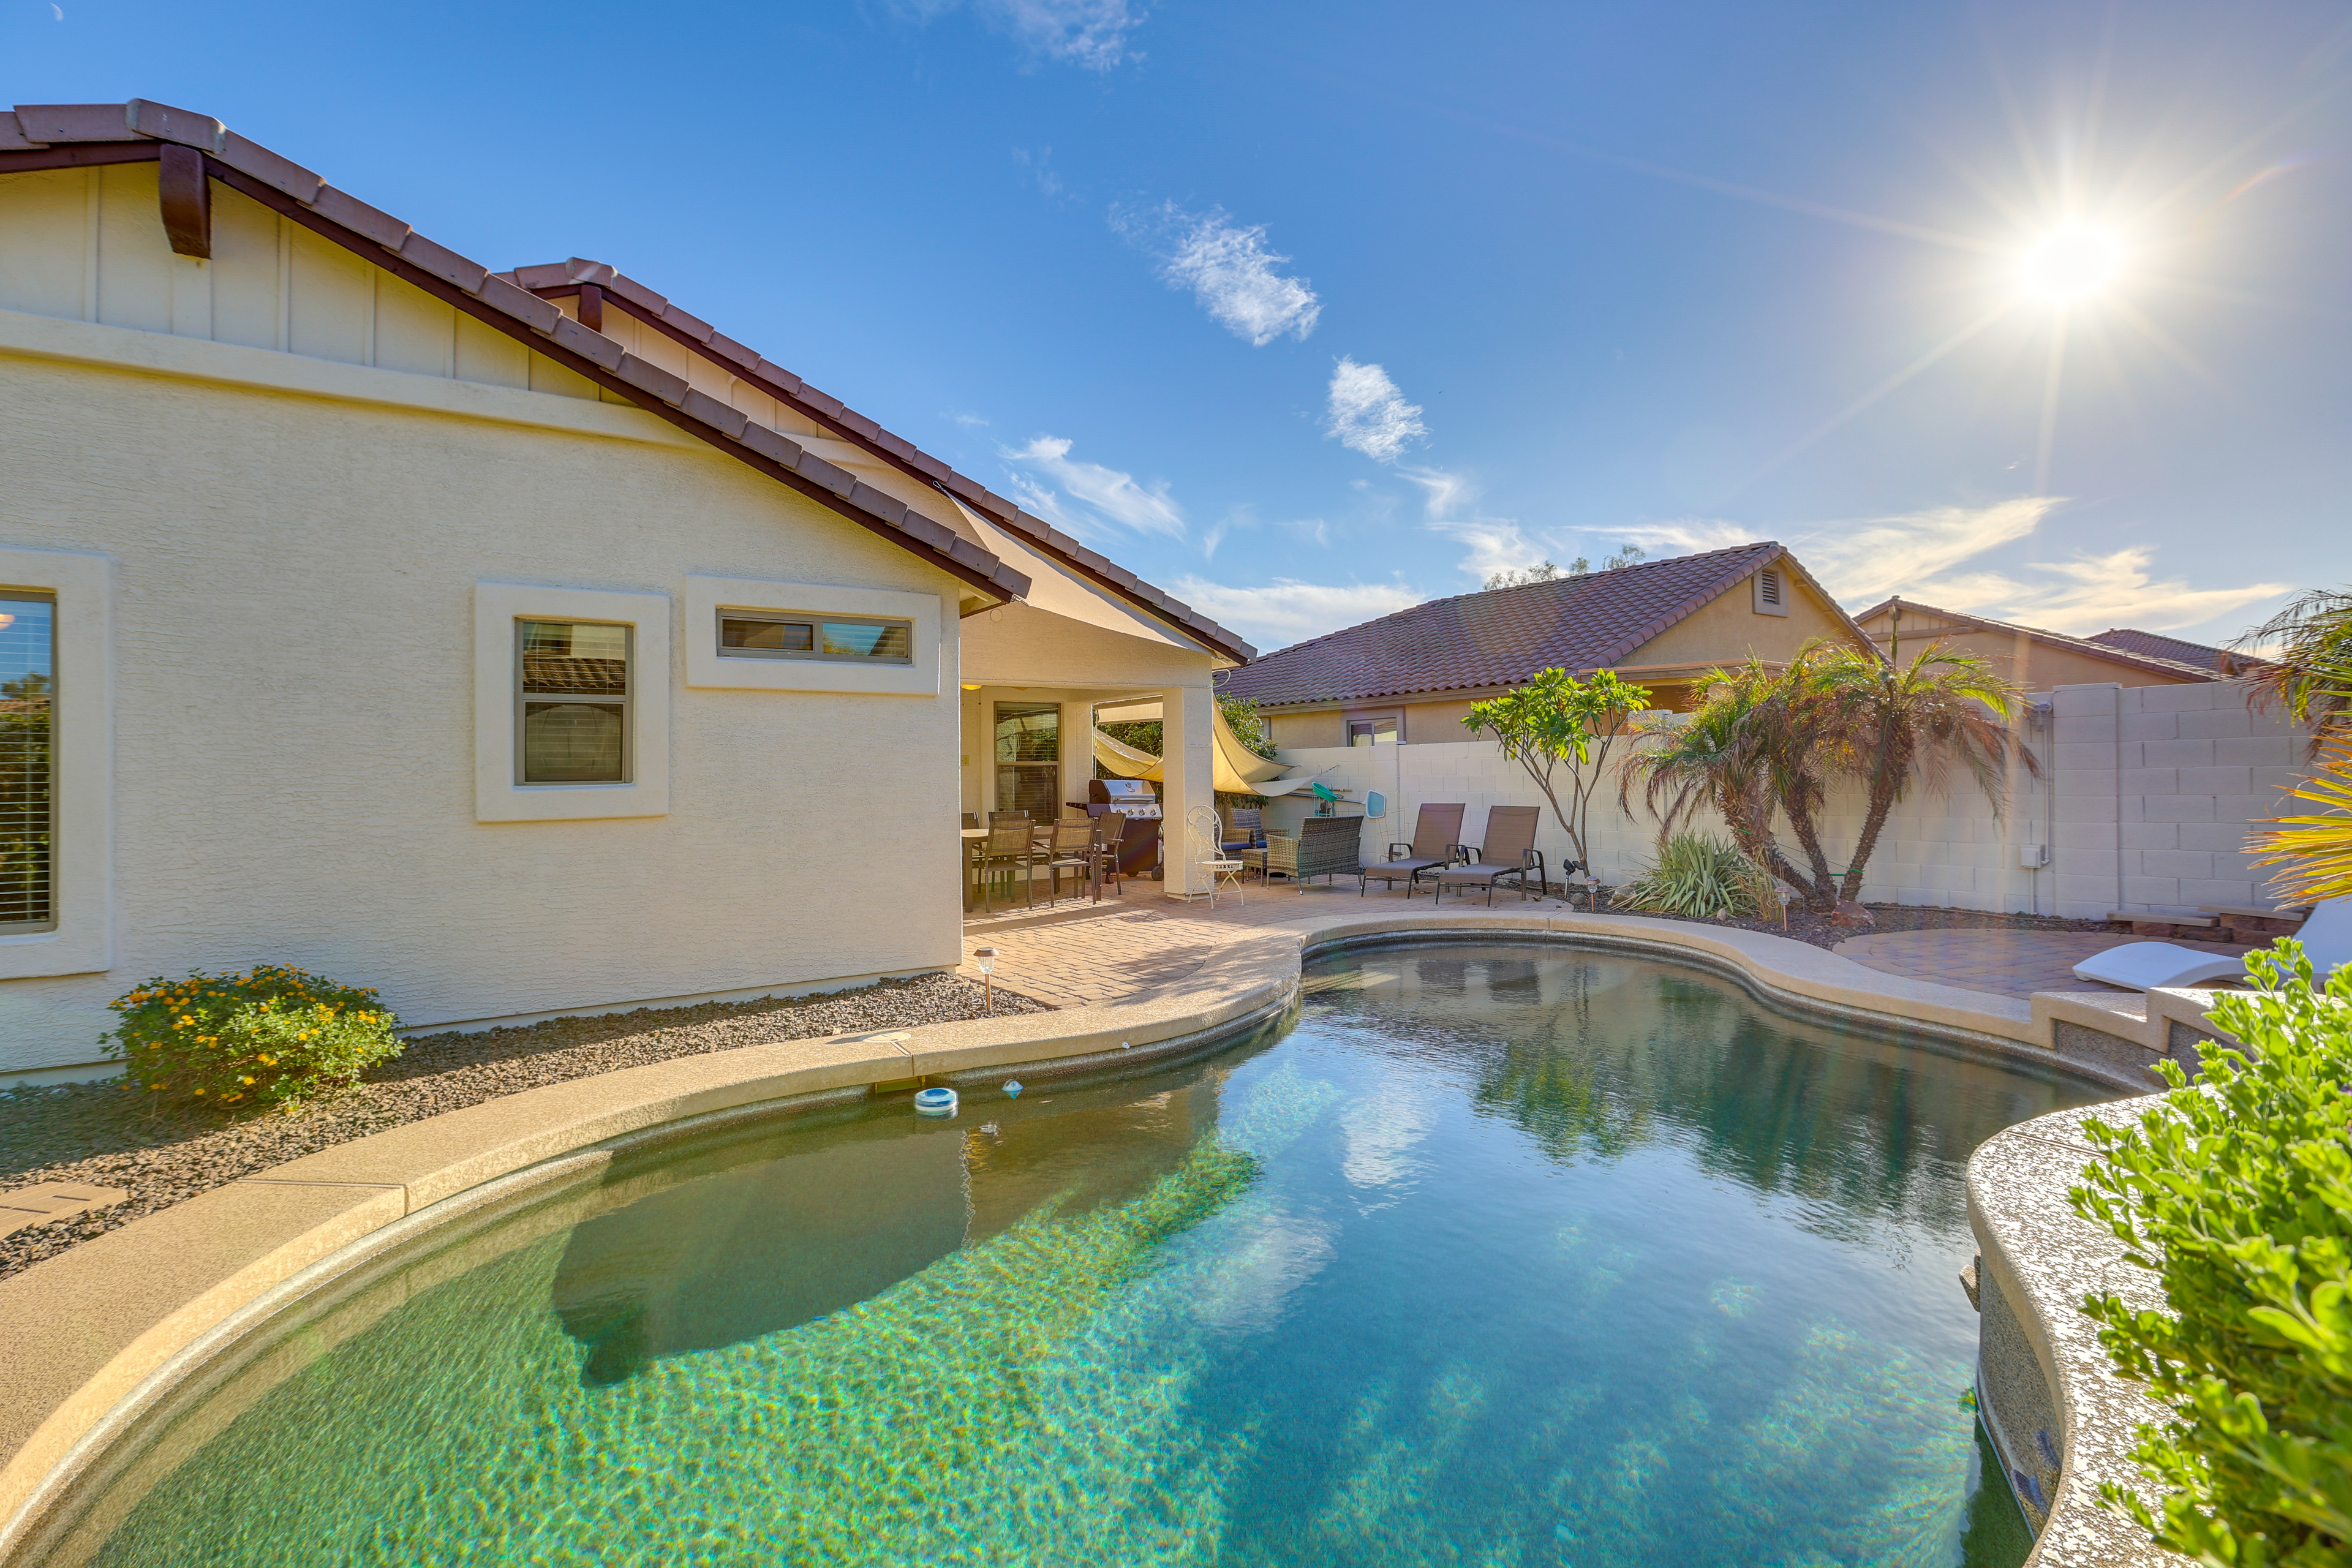 Property Image 1 - Sunny Surprise Home: Heated Outdoor Pool, Hot Tub!